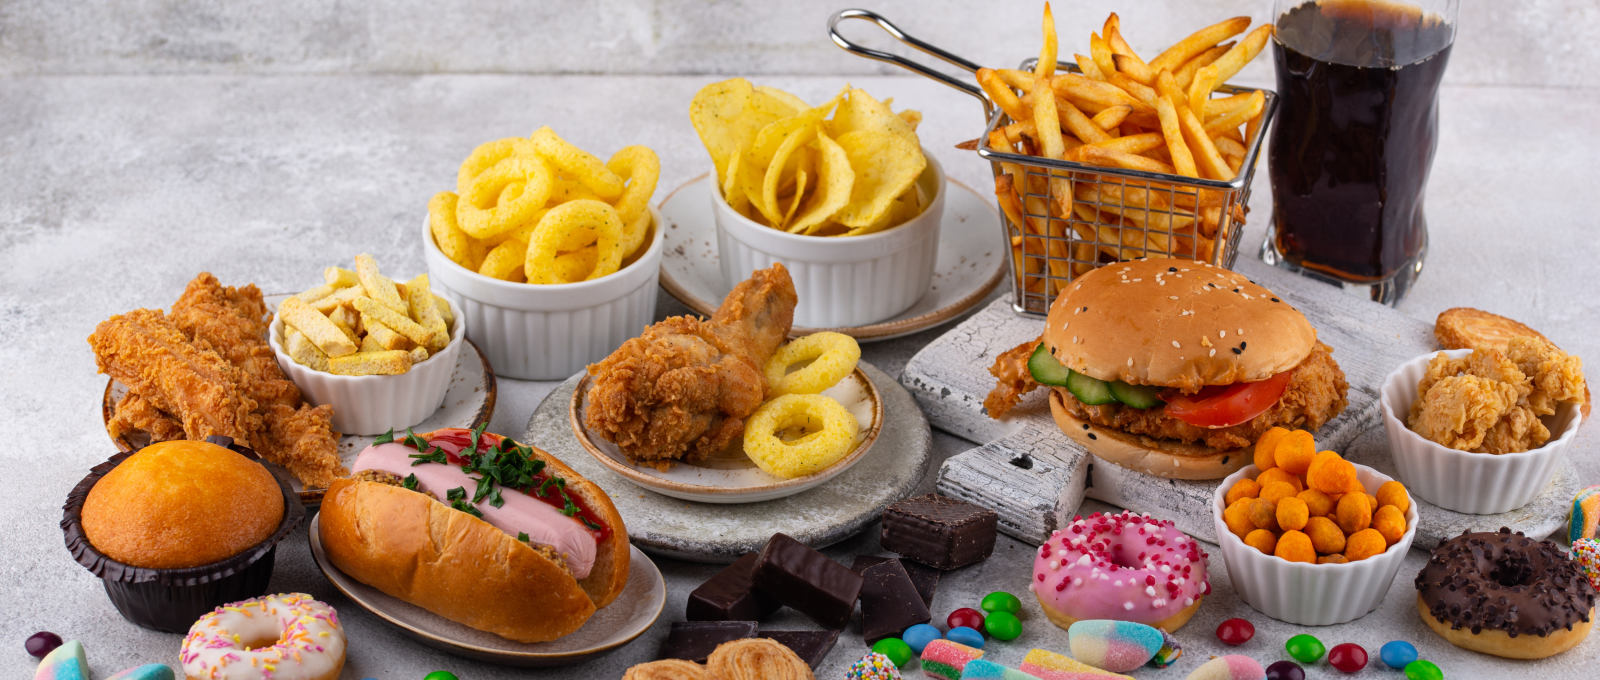 Ultra-processed foods increase cardiometabolic risk in children